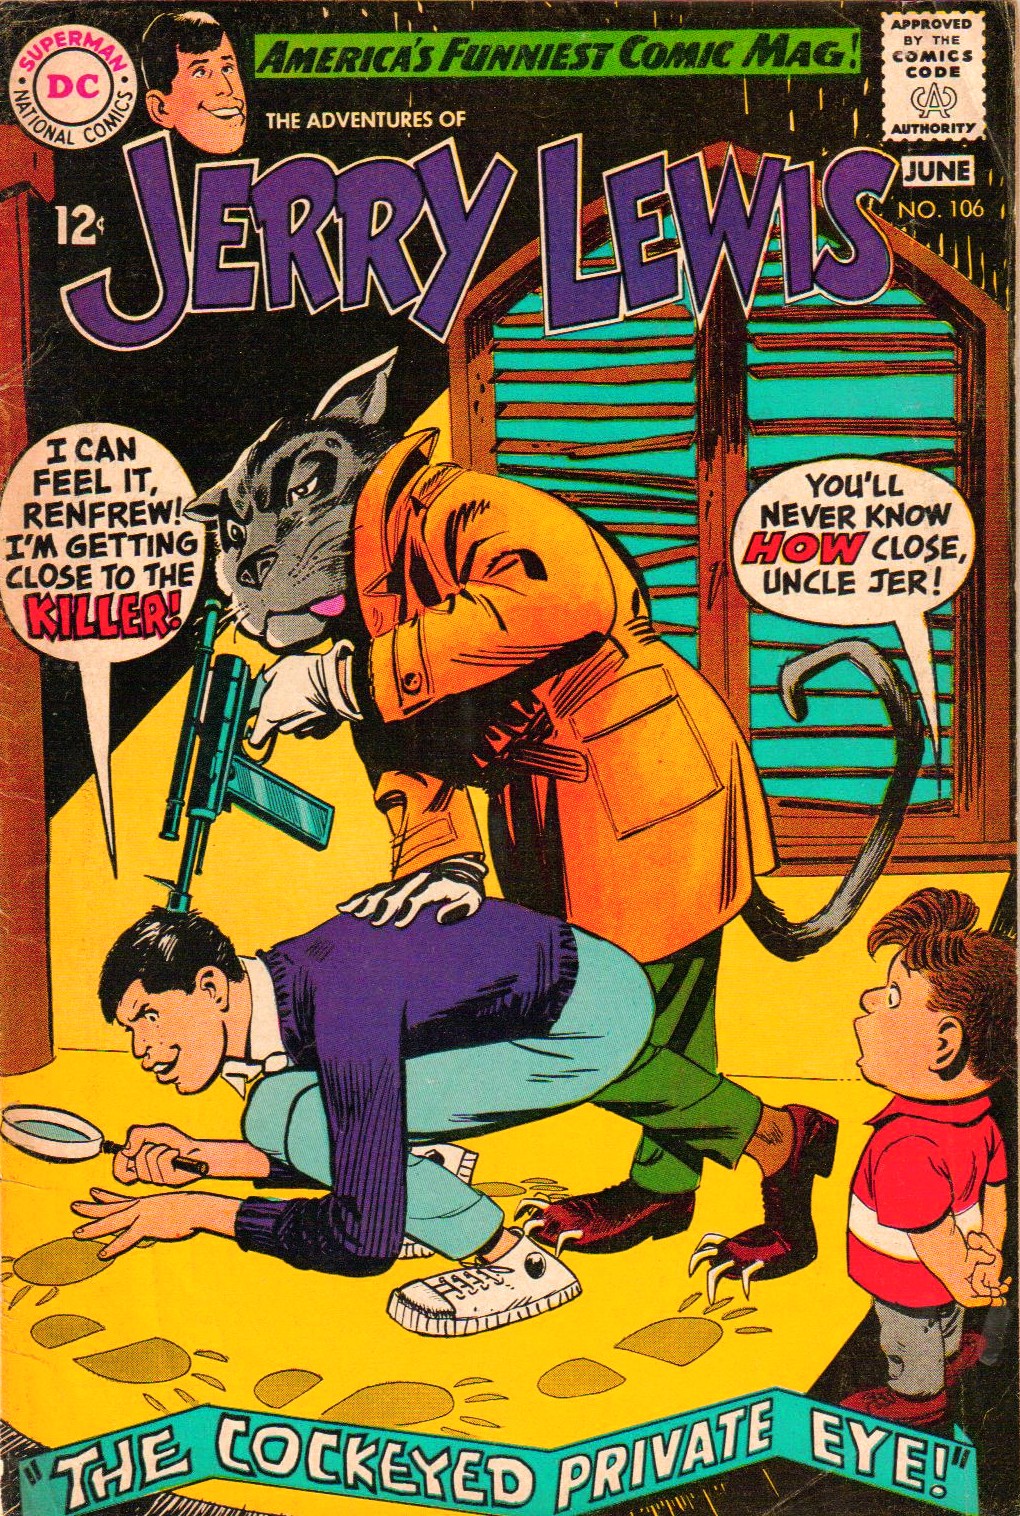 Read online The Adventures of Jerry Lewis comic -  Issue #106 - 1